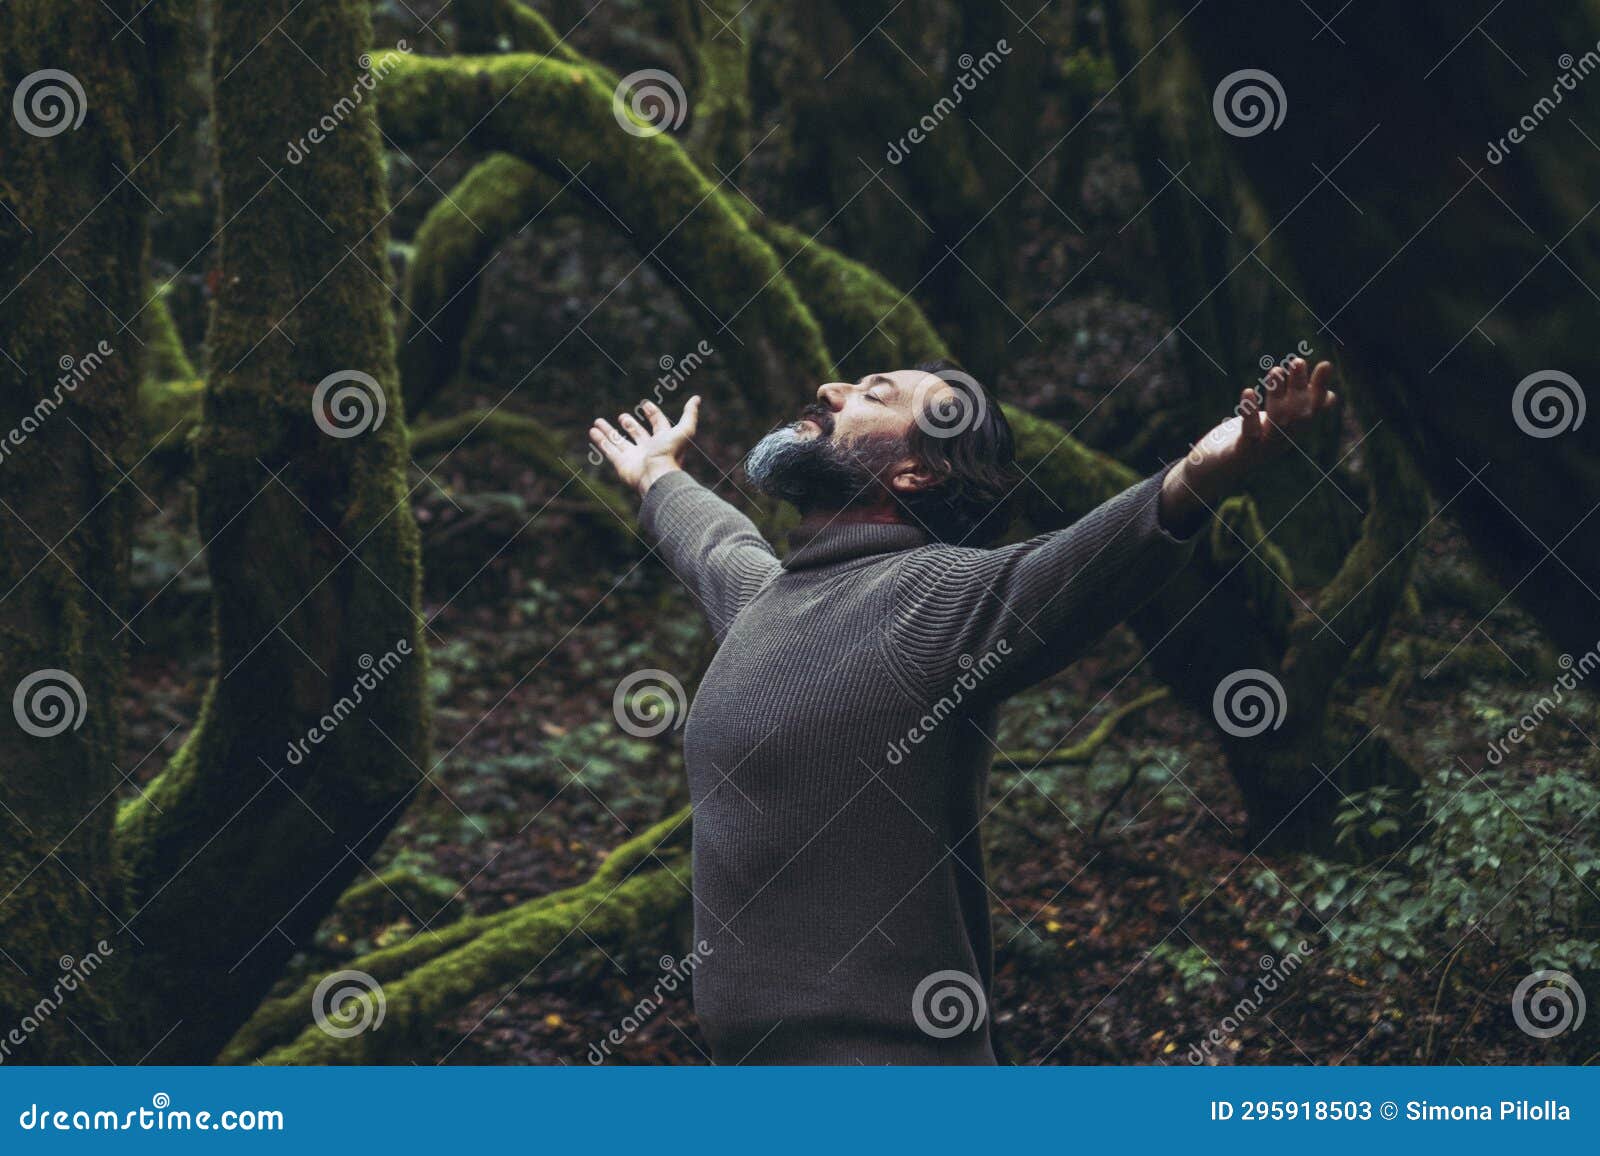 spiritual zenlike nature love people. one man with closed eyes and outstretching arms in the nature forest green trees scenic